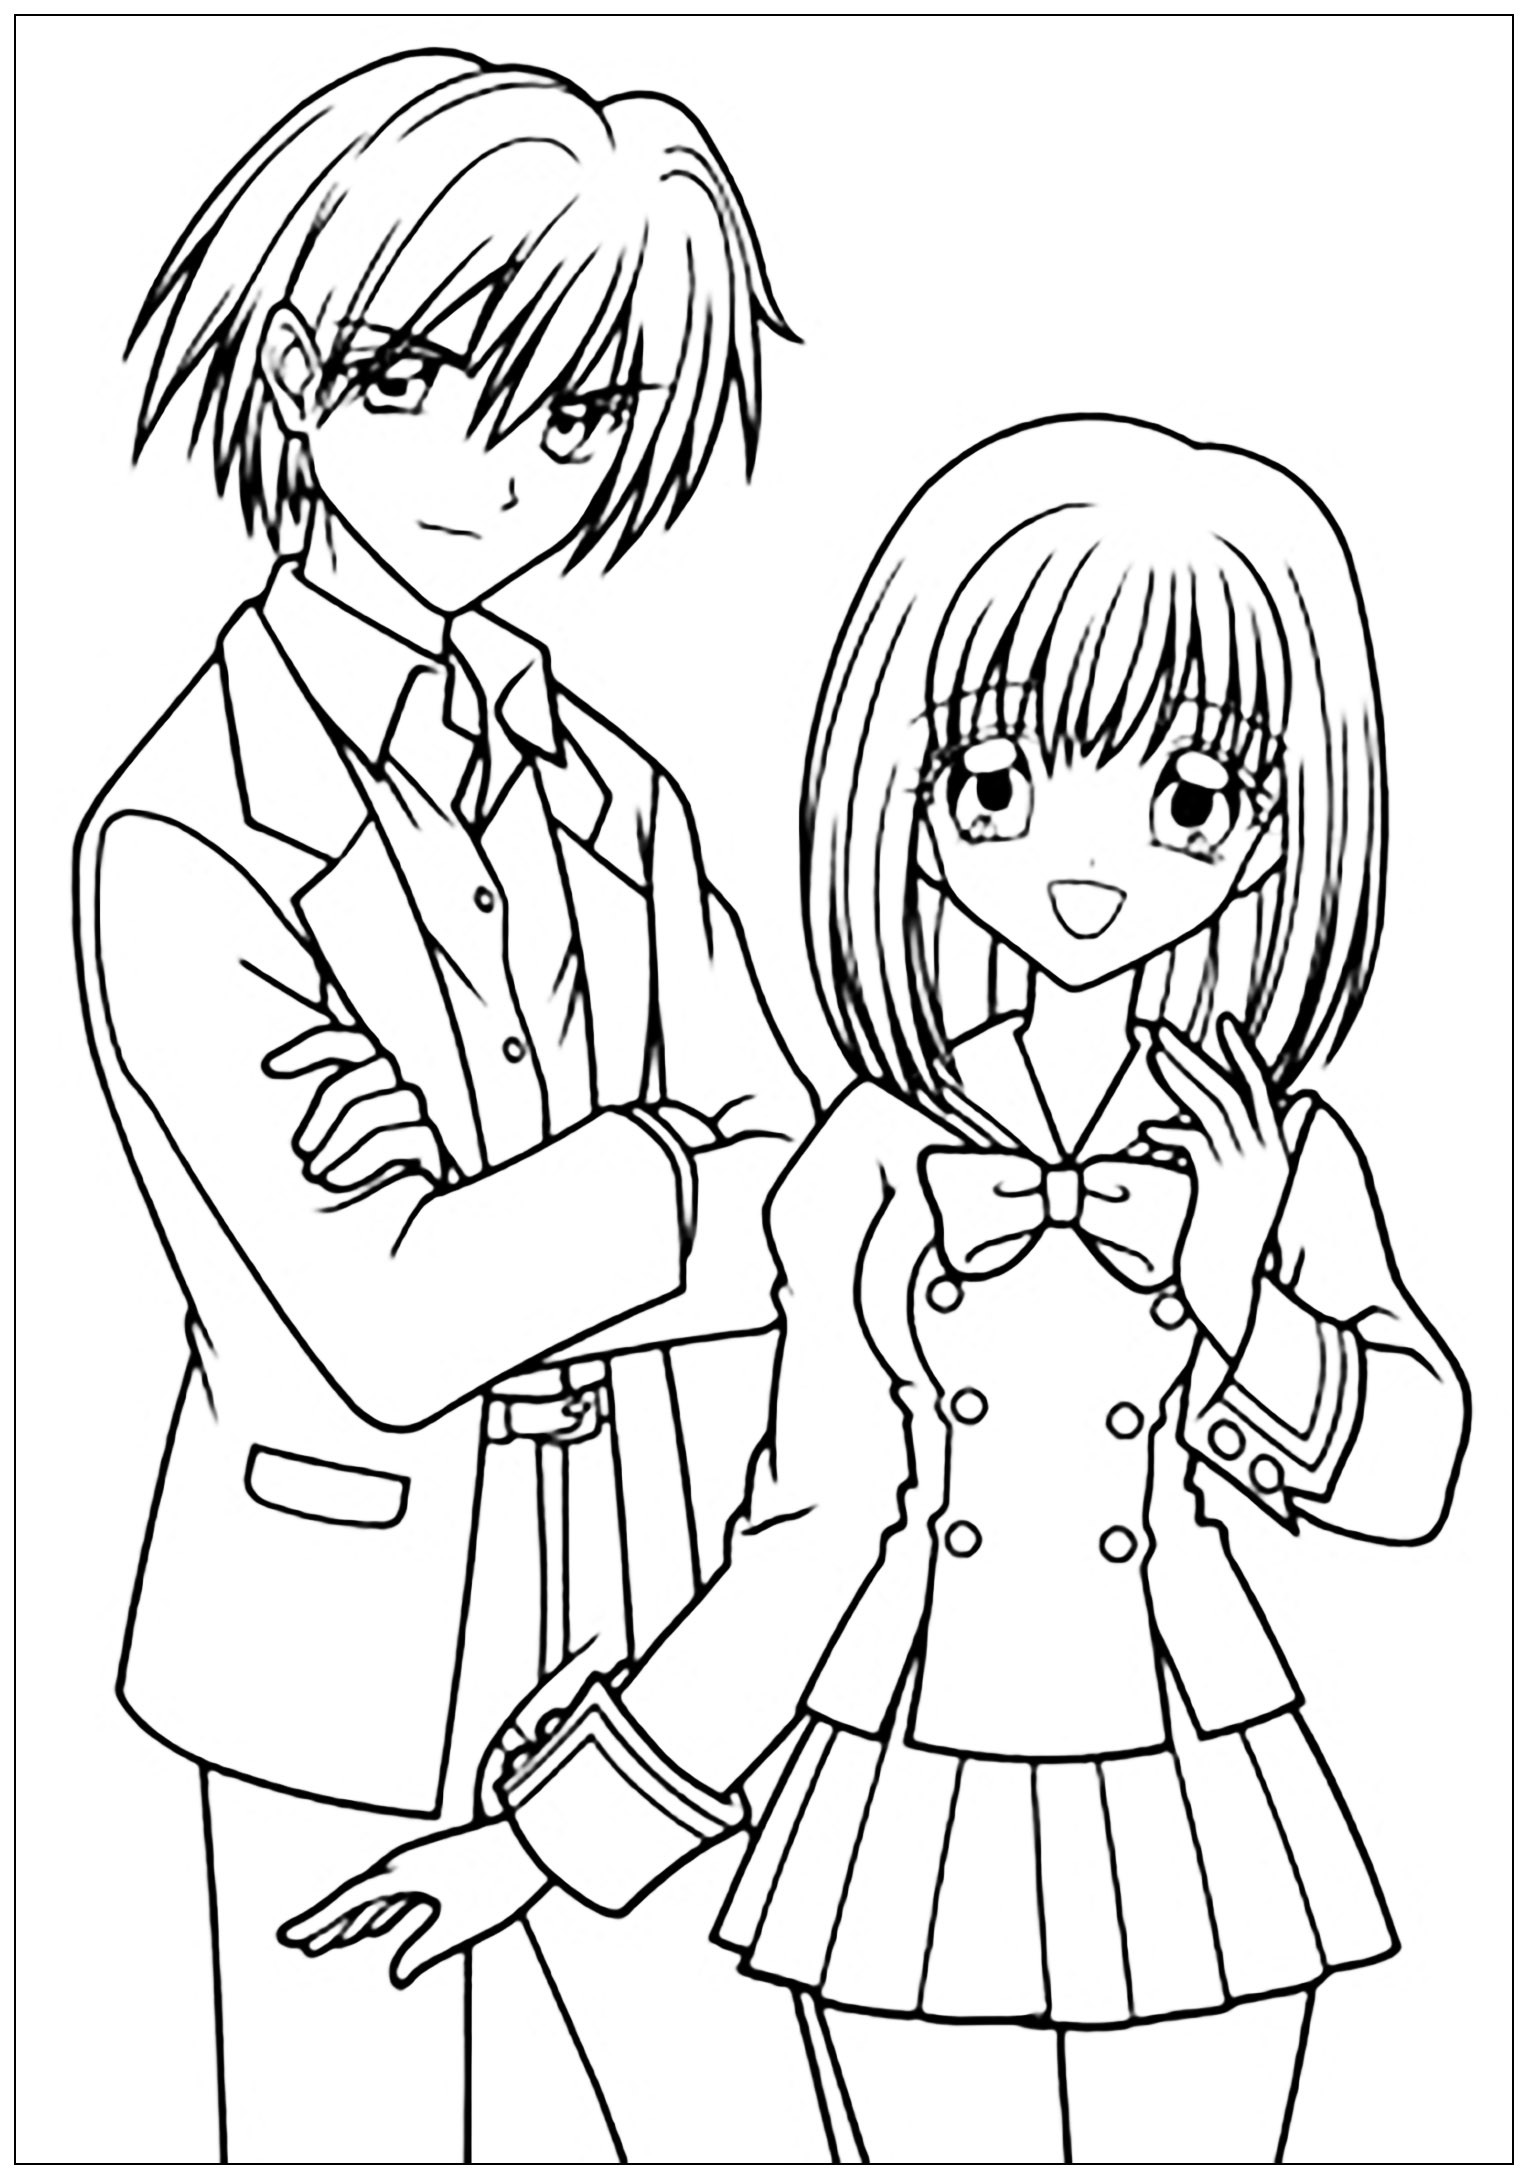 Anime Coloring Pages Boys
 Manga drawing boy and girl in school suit Manga Anime